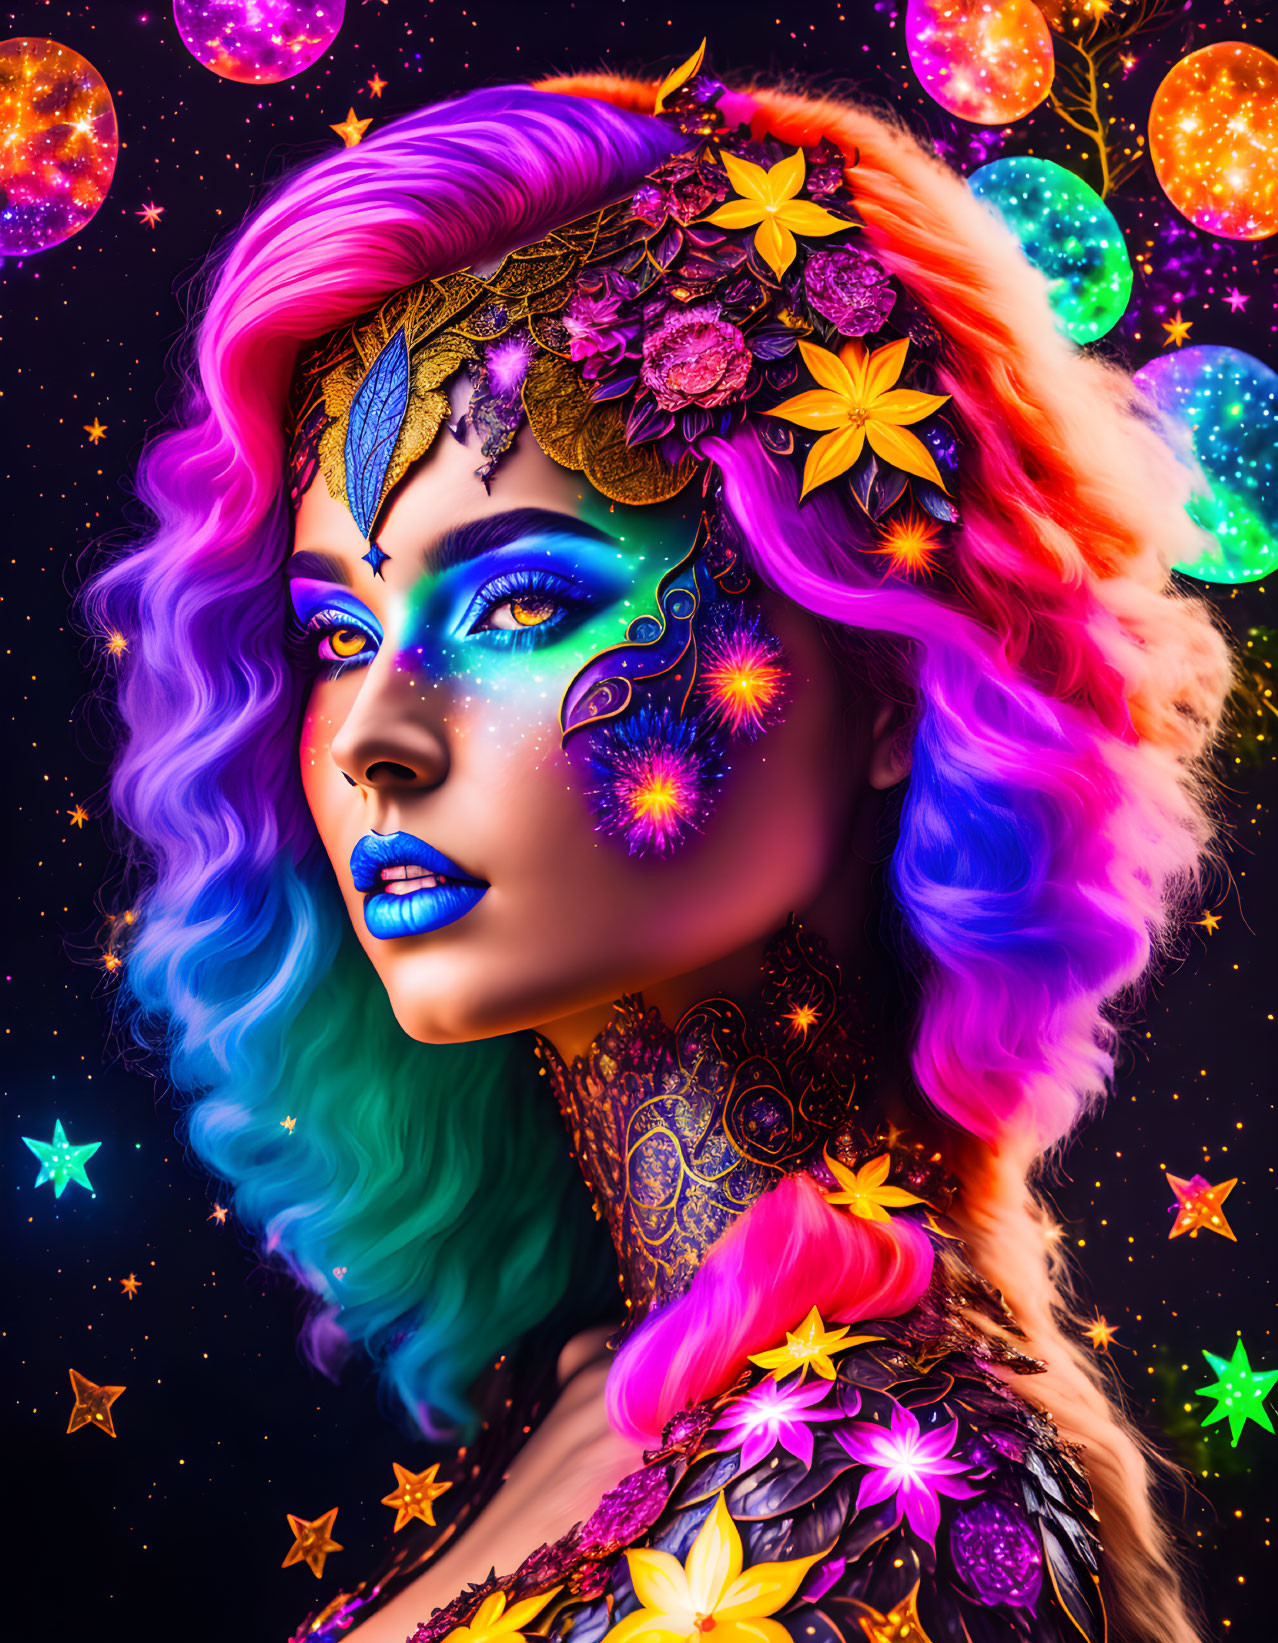 Colorful portrait of woman with purple and blue hair, cosmic makeup, floral headpiece, surrounded by